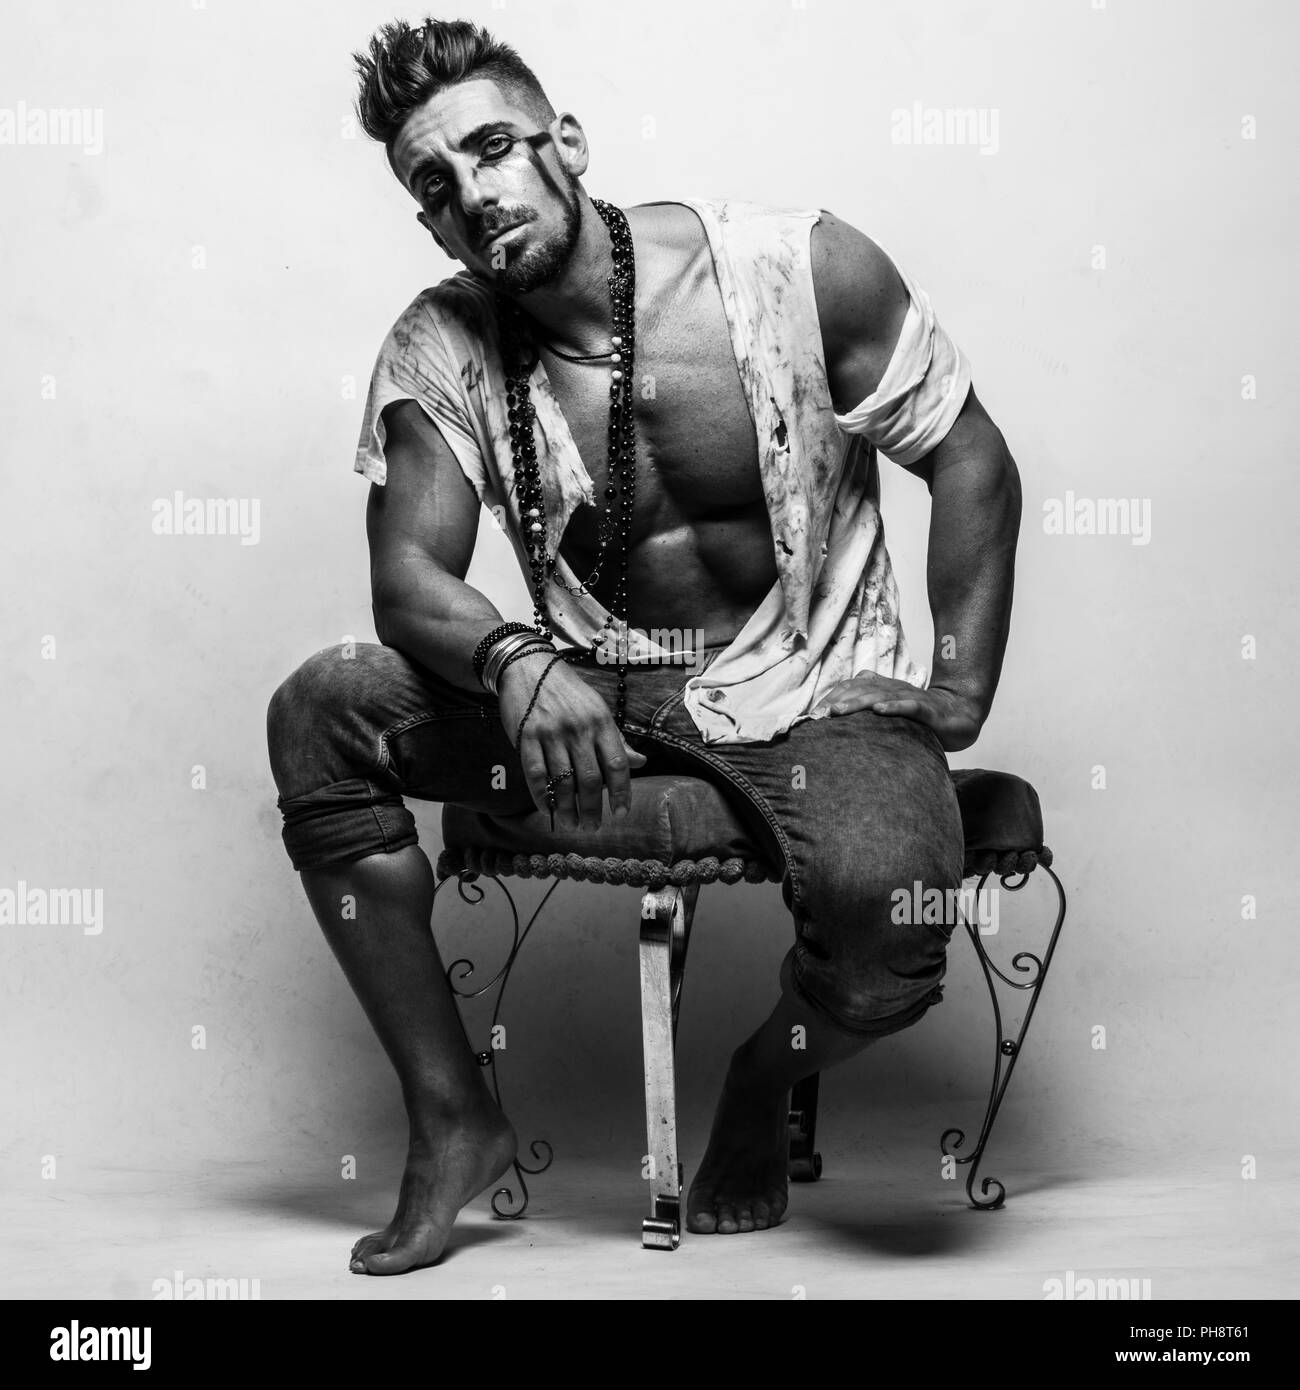 Muscular Man in Ragged Clothes Sitting on a Chair Stock Photo